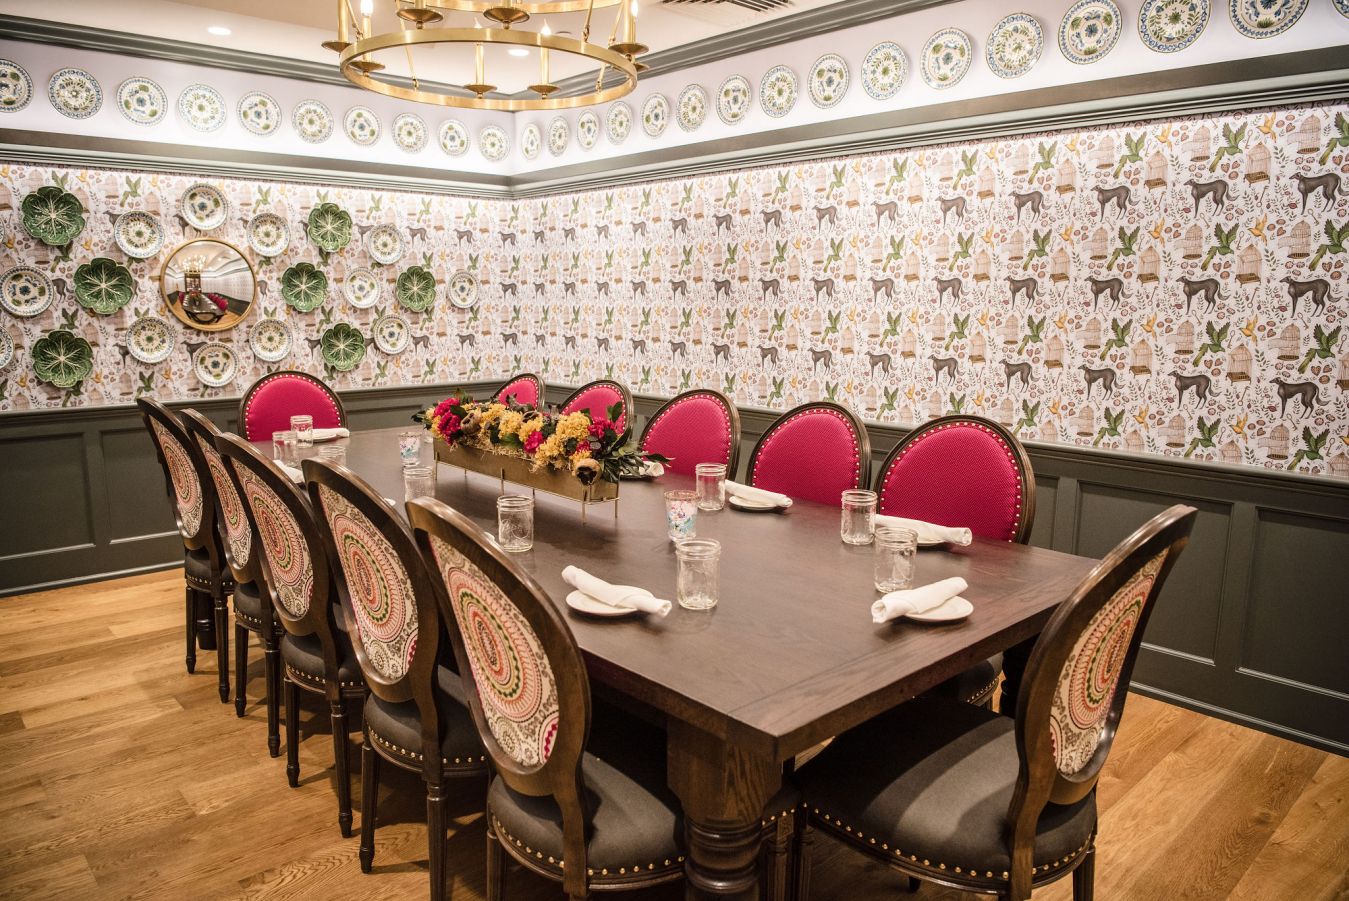 The Chadds Ford room seats up to 12 guests for a private dining experience